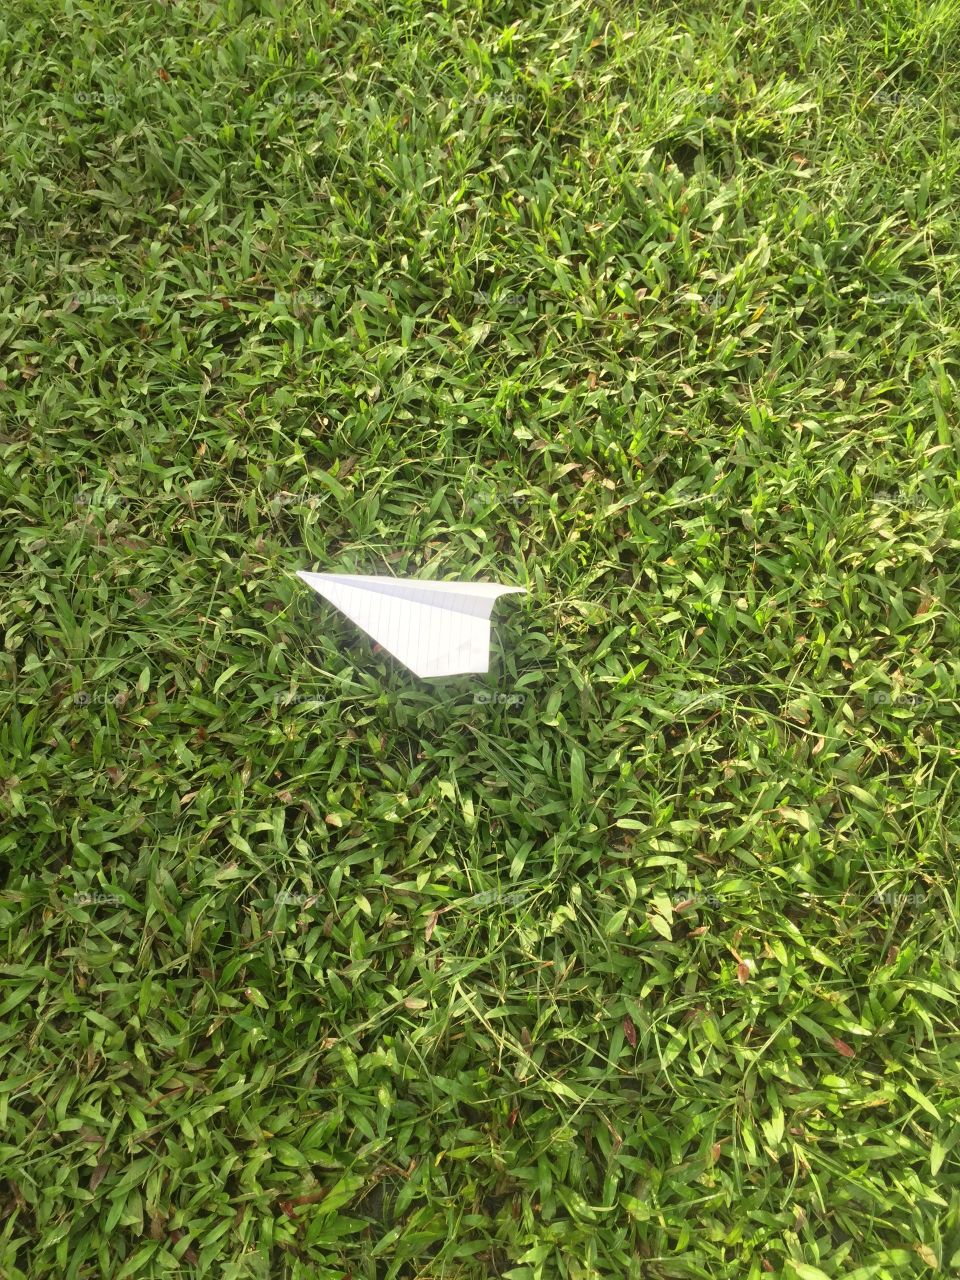 Paper Airplane on the Grass